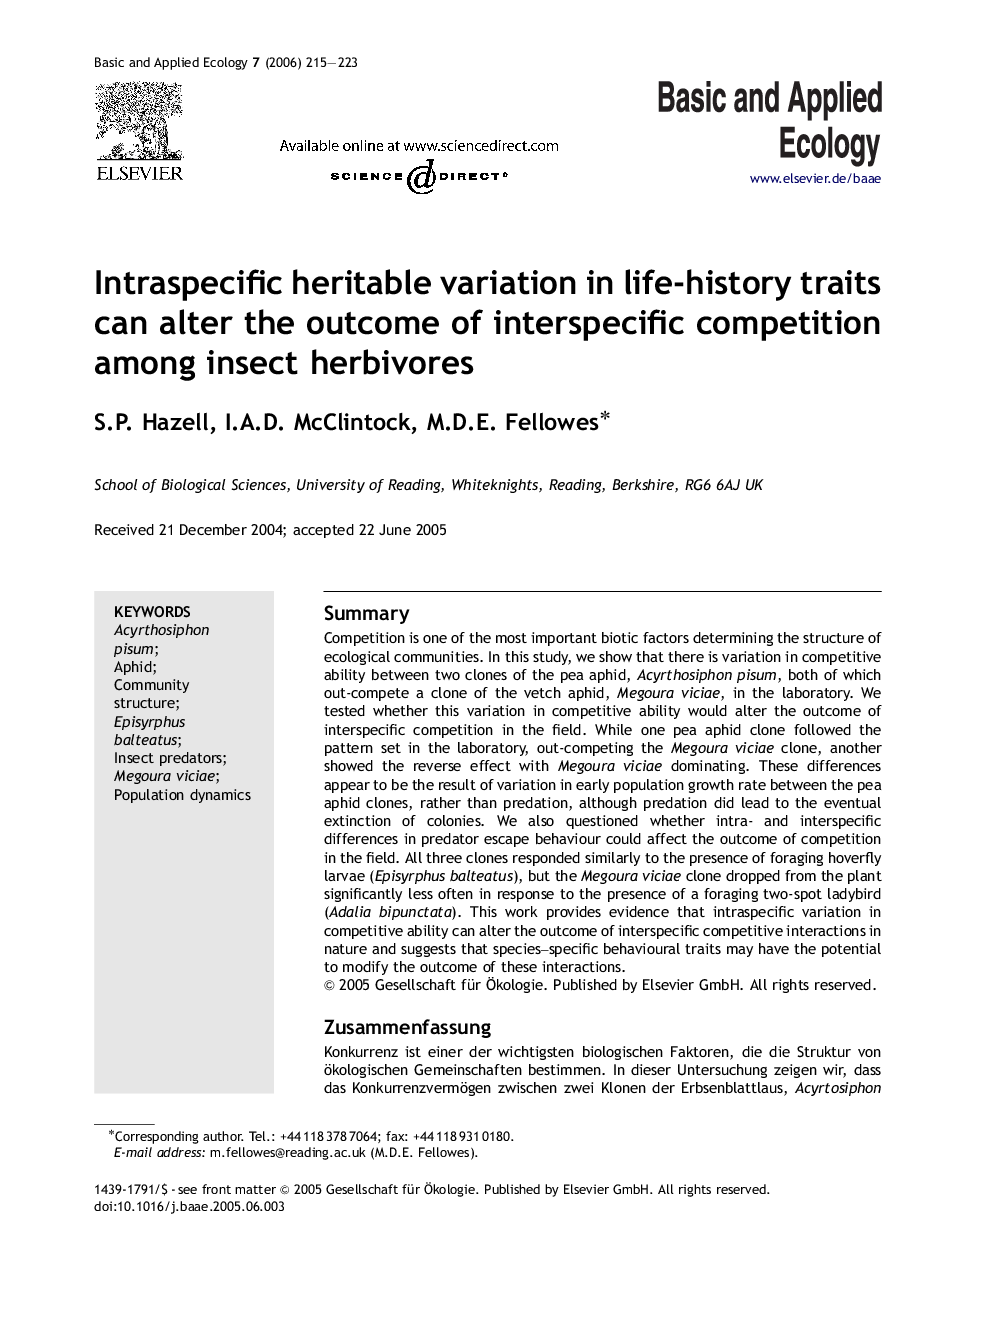 Intraspecific heritable variation in life-history traits can alter the outcome of interspecific competition among insect herbivores